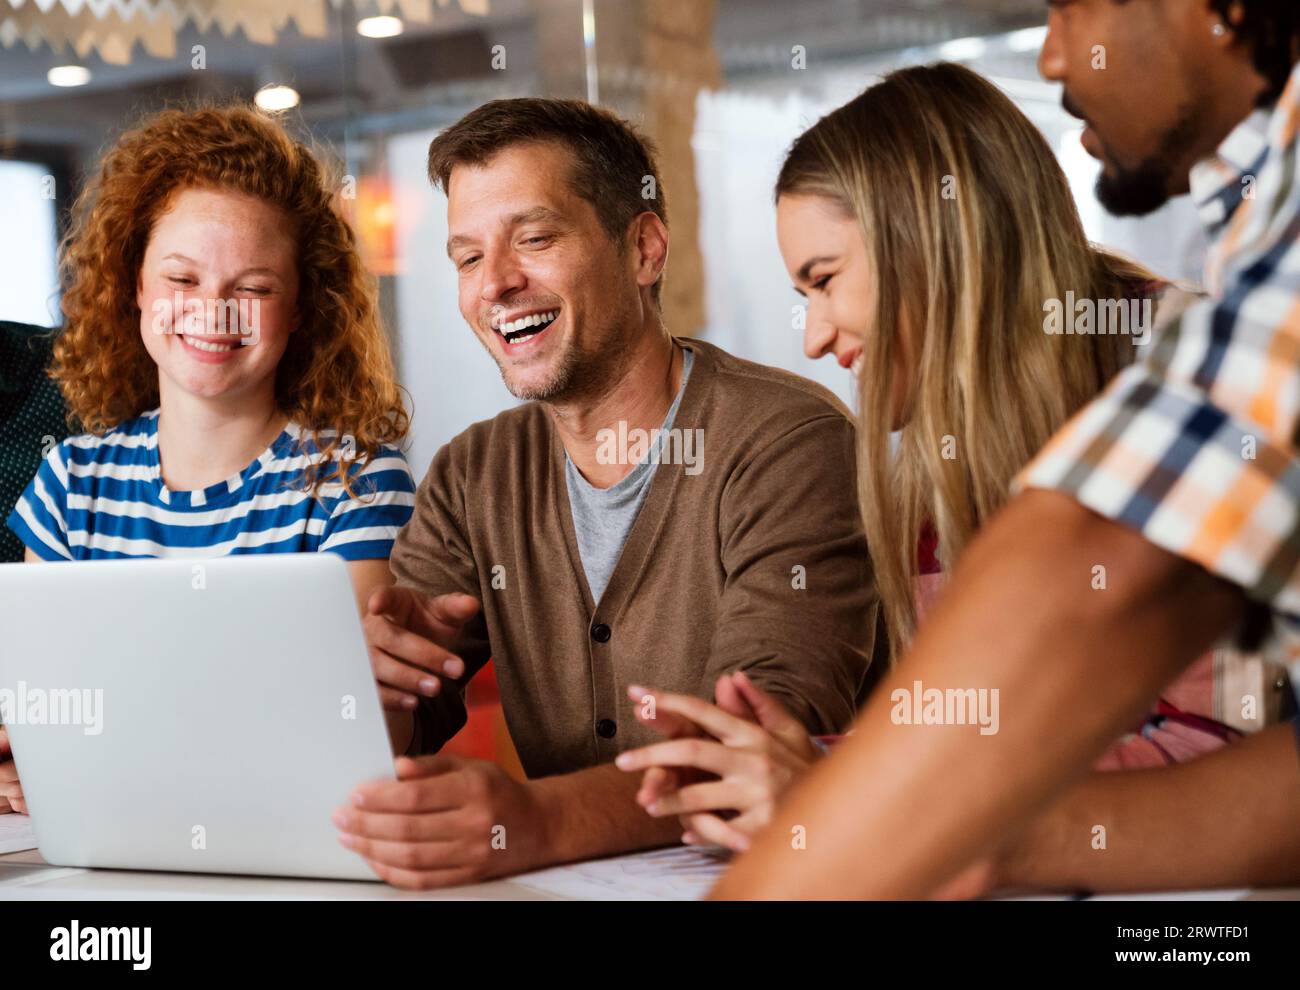 Programmers working in a software developing company office Stock Photo